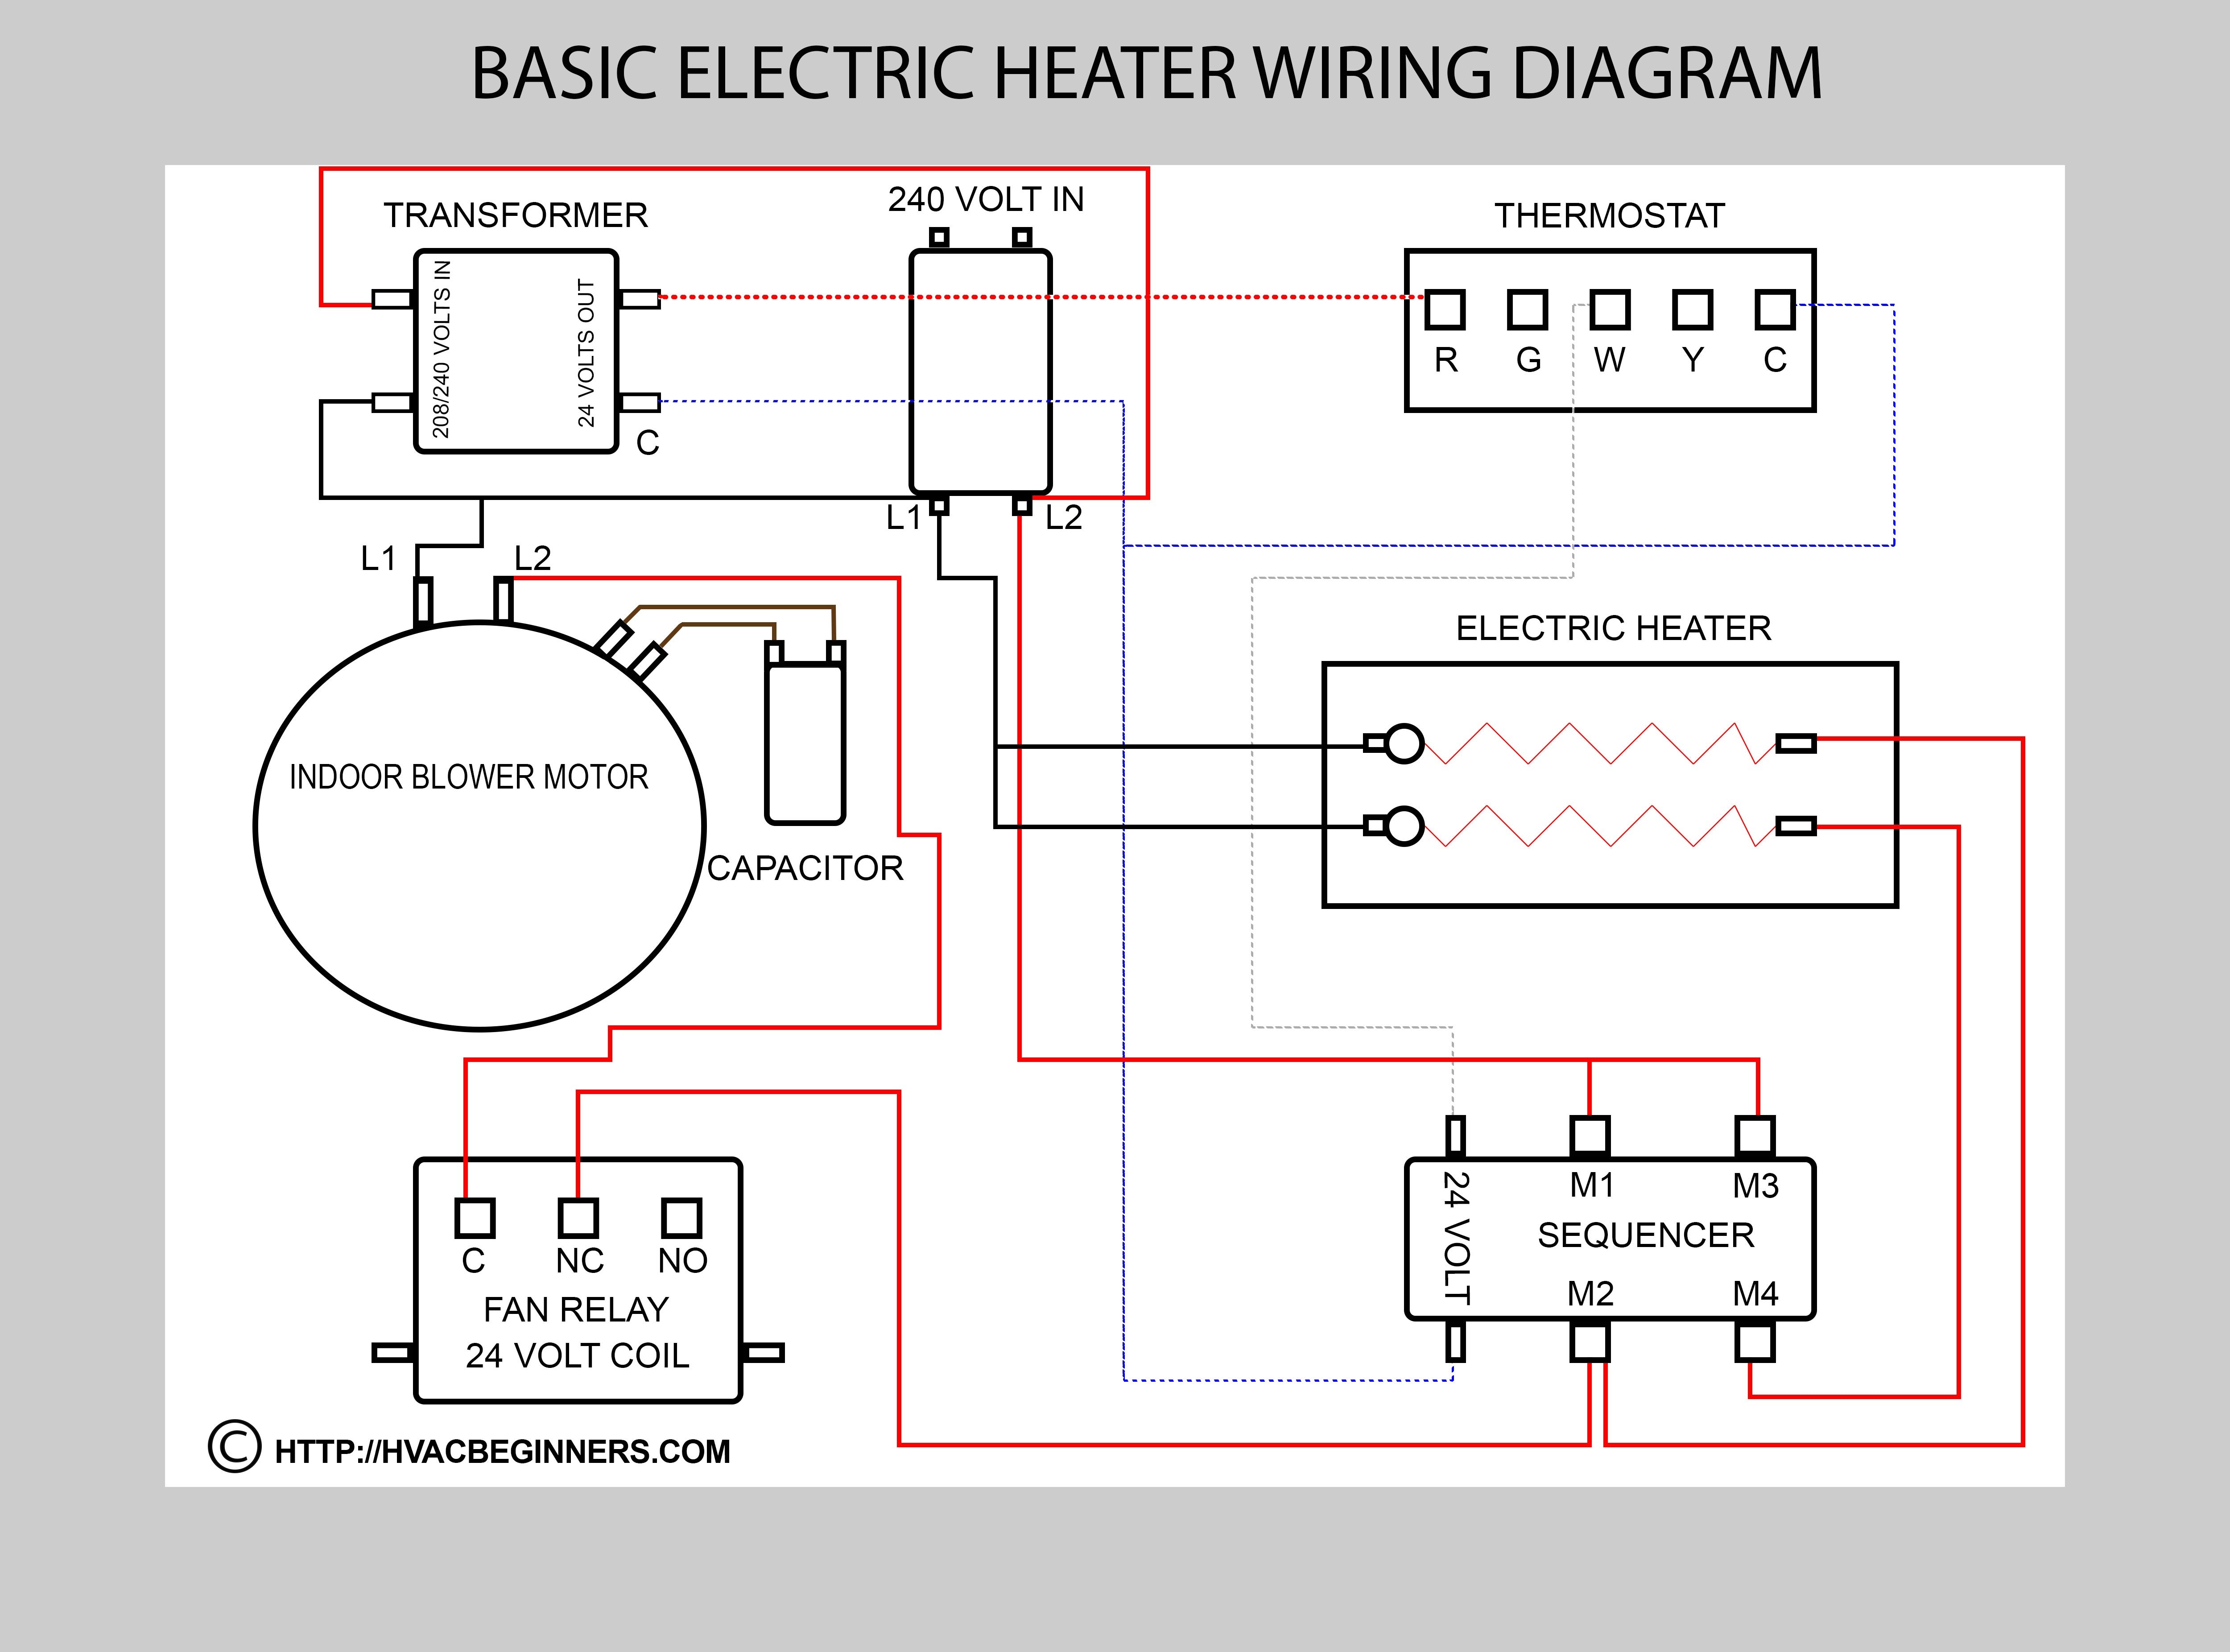 Split system air conditioner wiring diagram hvac wire central and relay futuristic visualize pressor parts